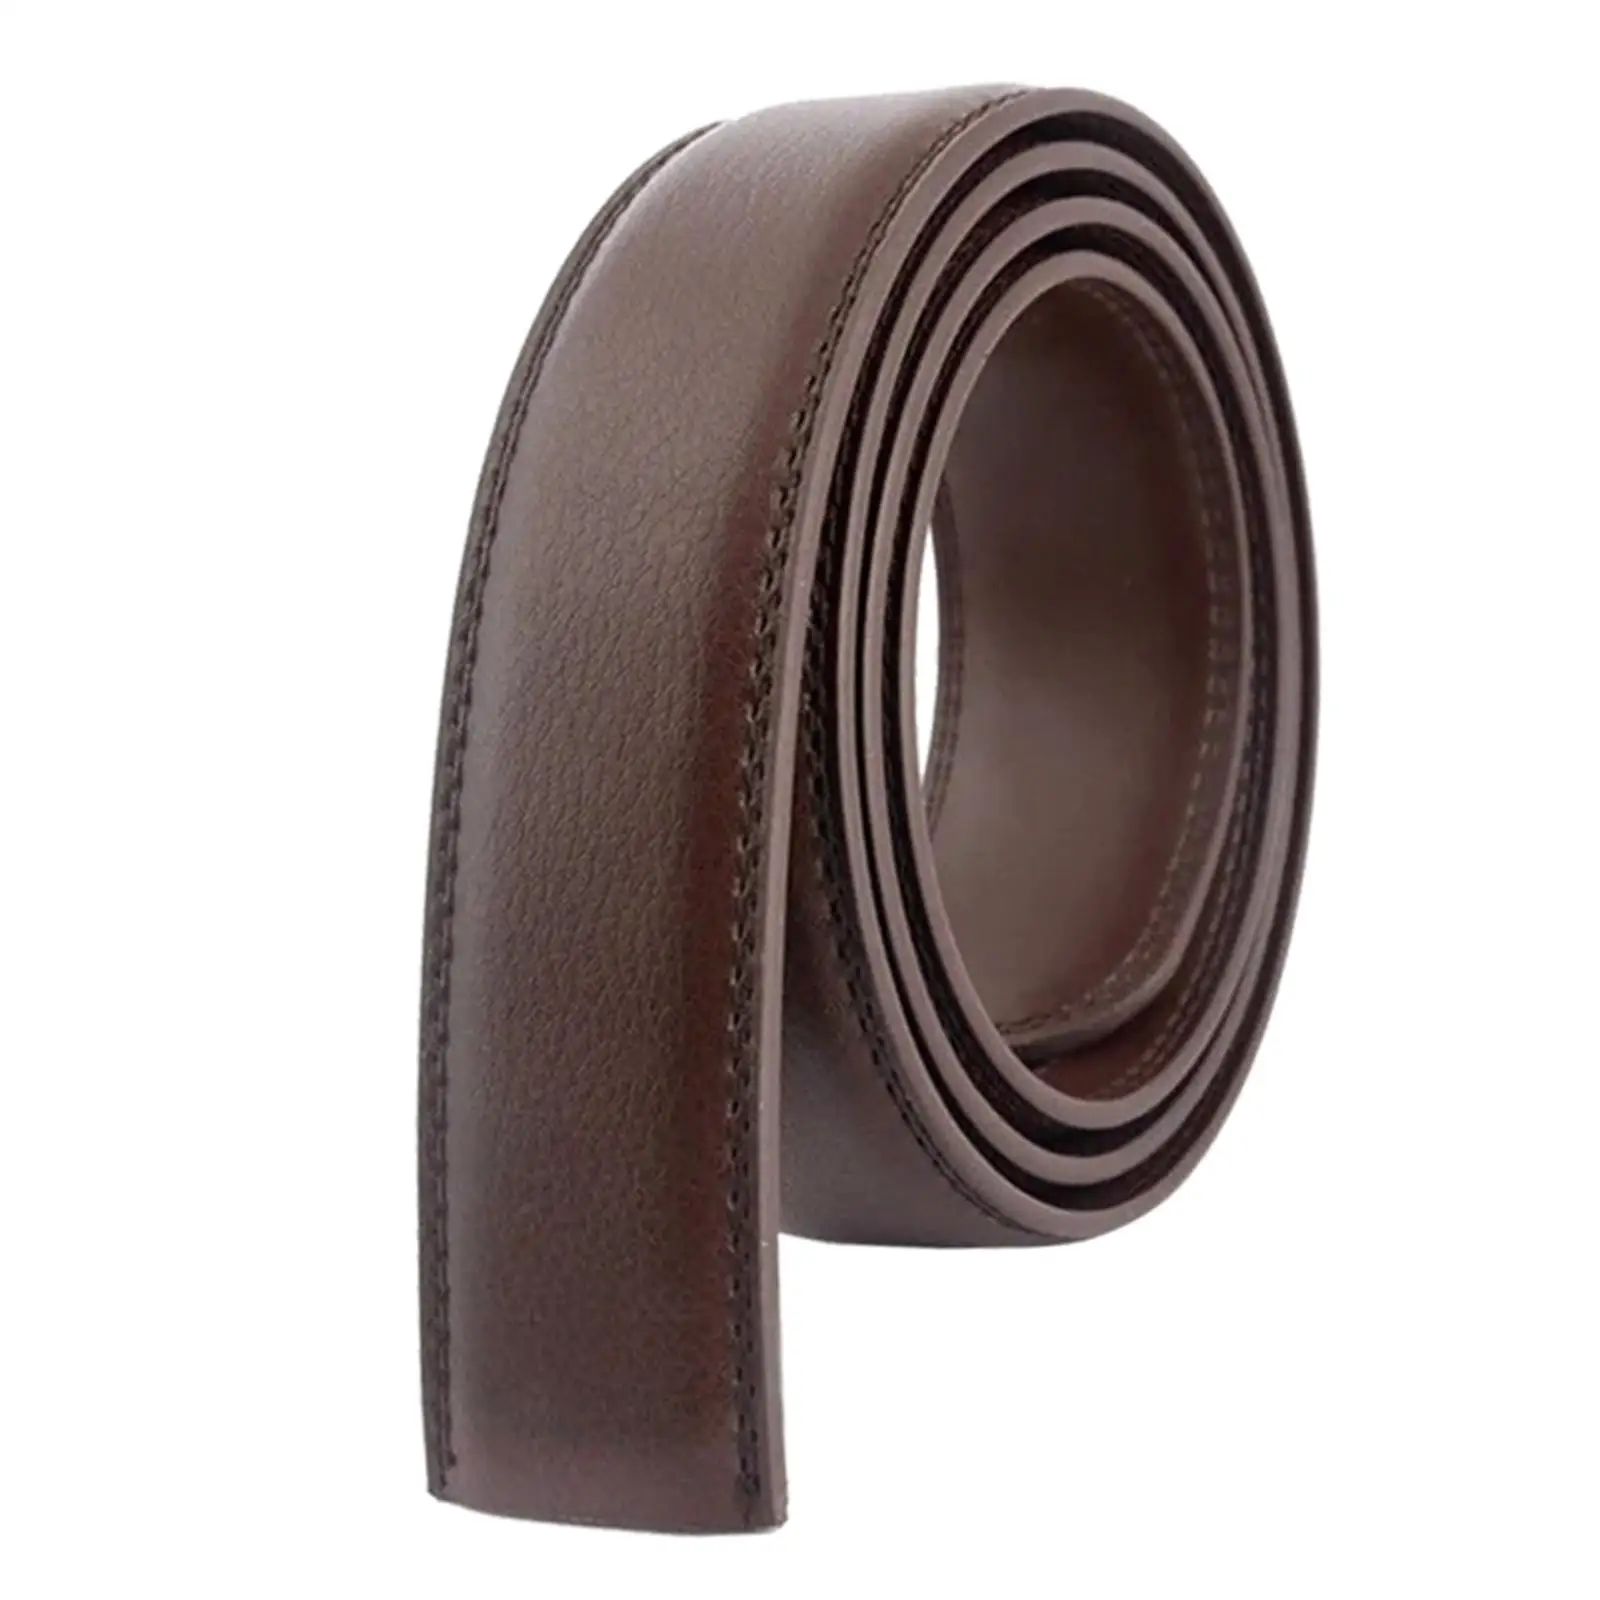 Casual Leather Belt 3.5cm Wide Replacement Waistband No Holes No Buckle 49inch Men Belt for Trousers Clothing Automatic Buckle